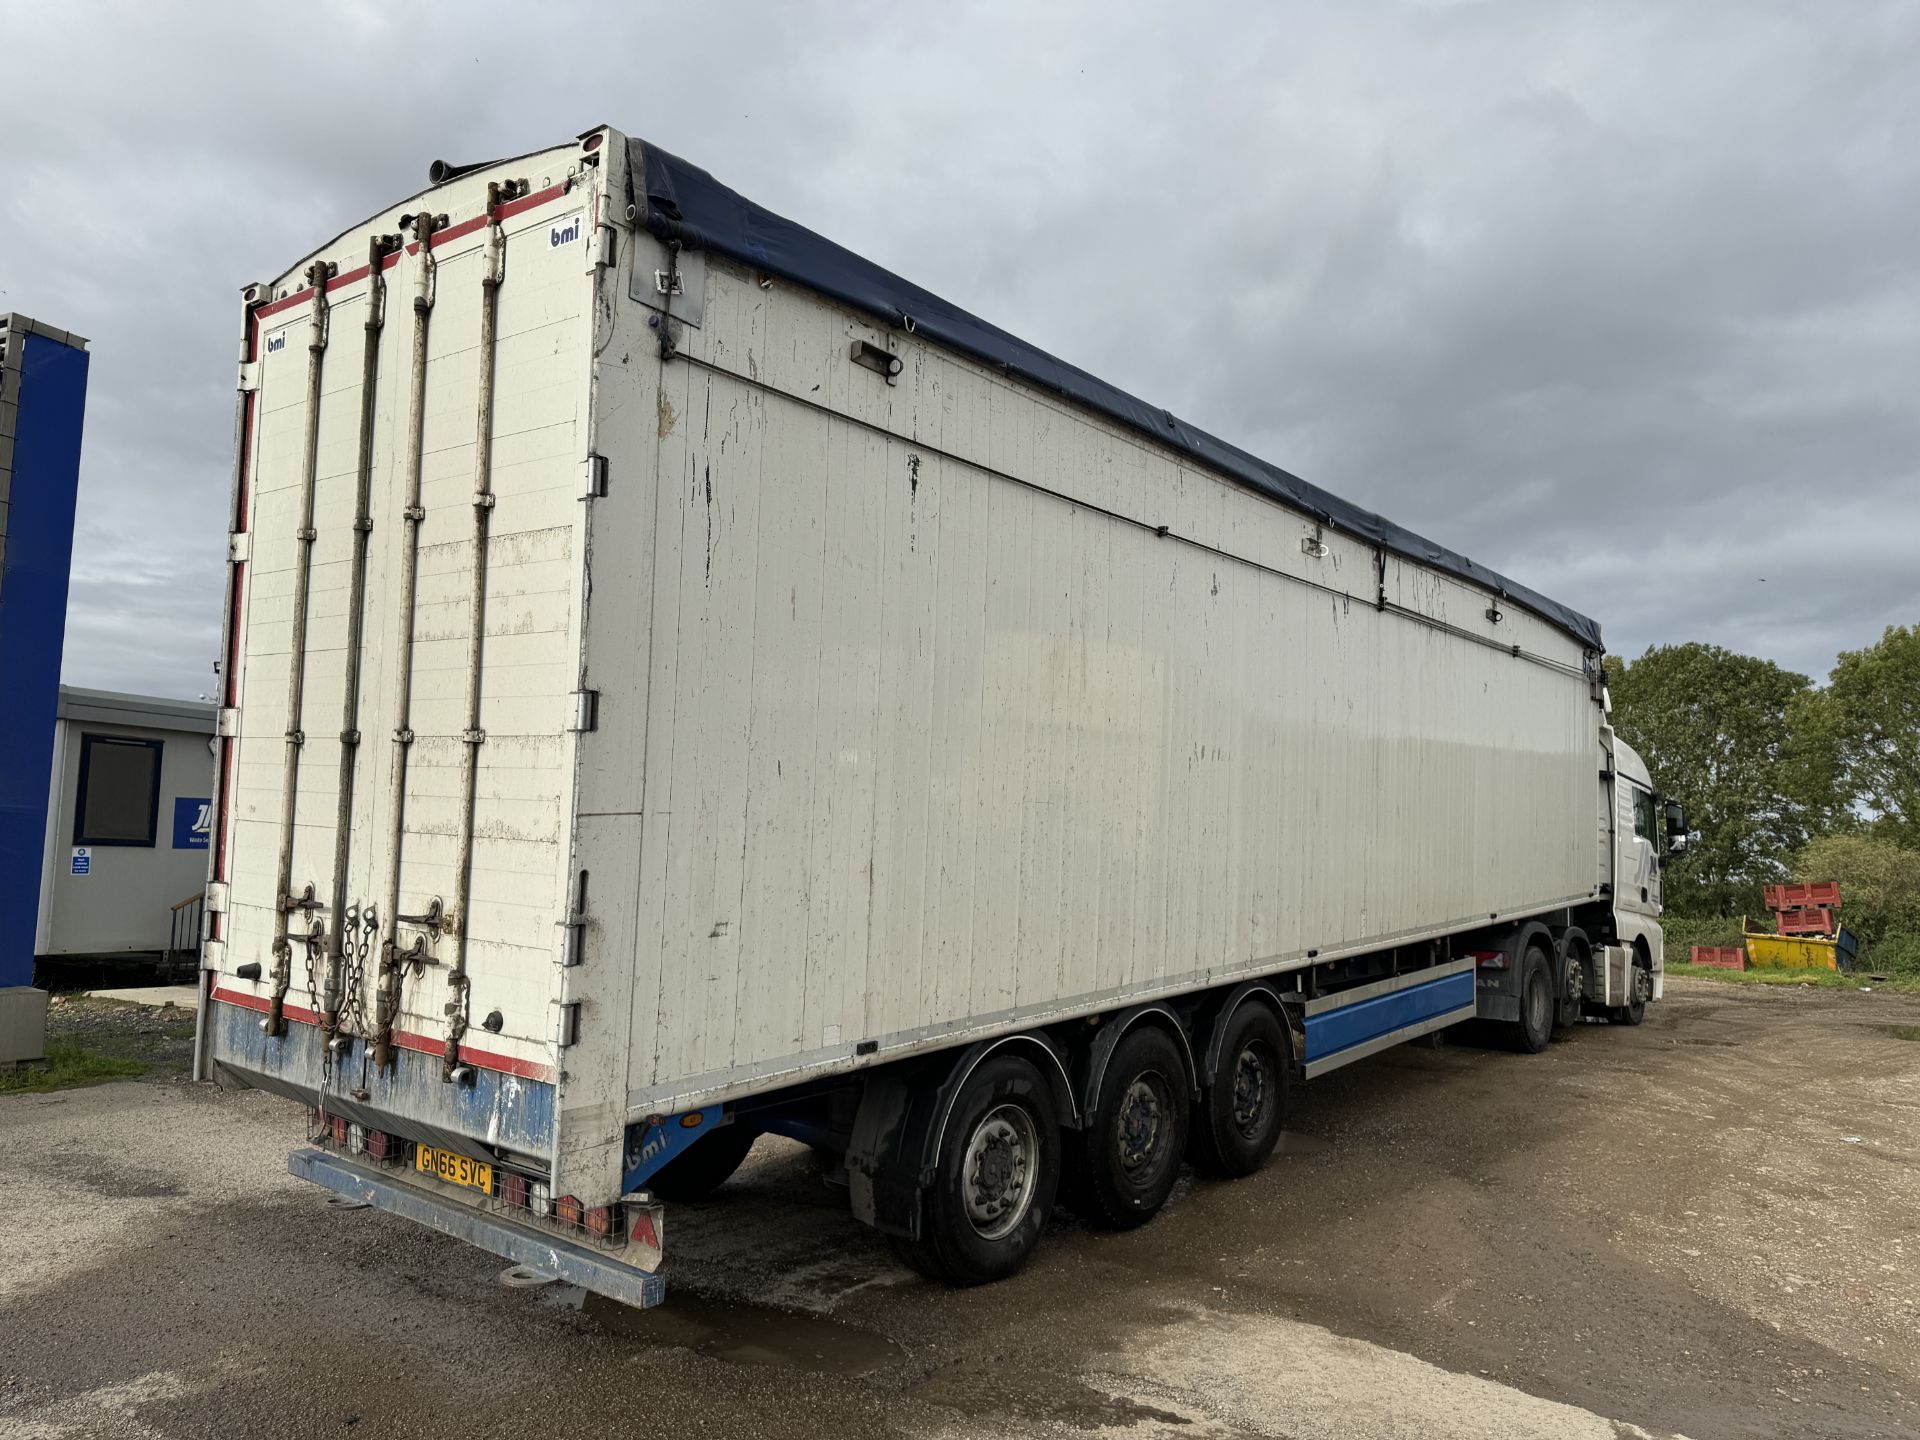 2017 - BMI Trailers Type AW 125, Tri Axle Air Suspension 125 Yard Cargo Floor Trailer - Image 32 of 46